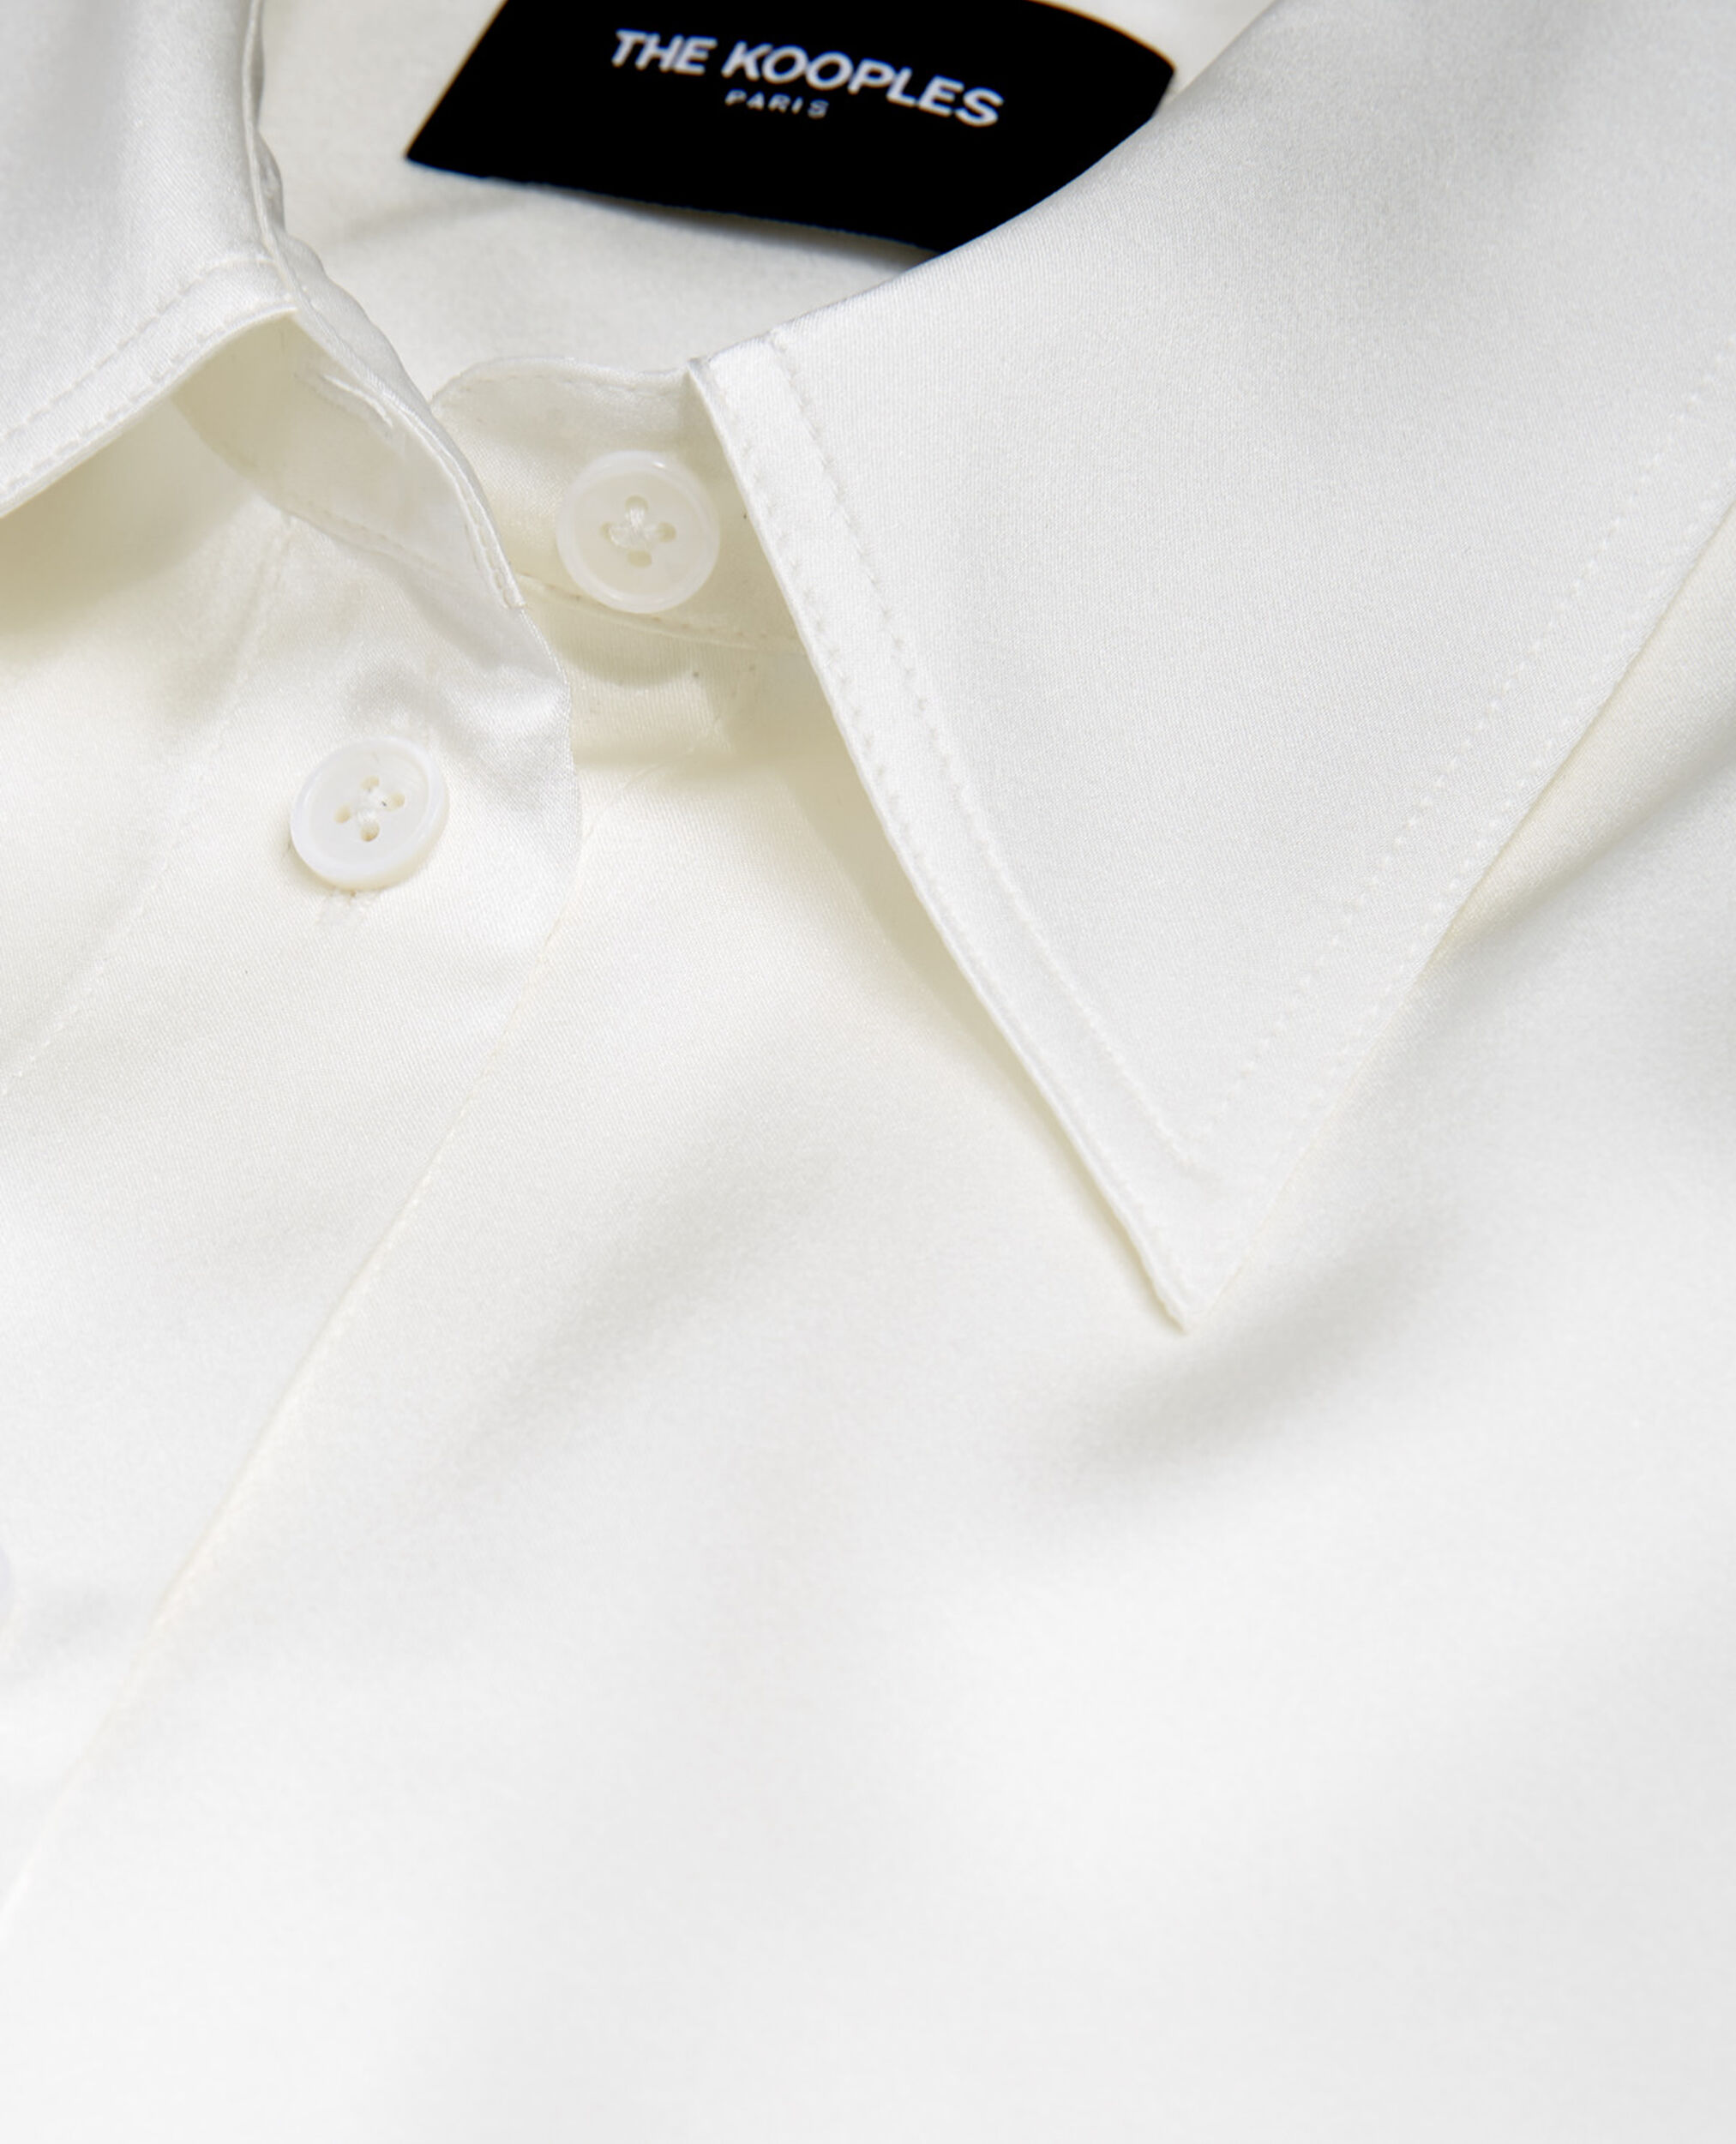 Chemise soie blanche à poignets larges, WHITE, hi-res image number null